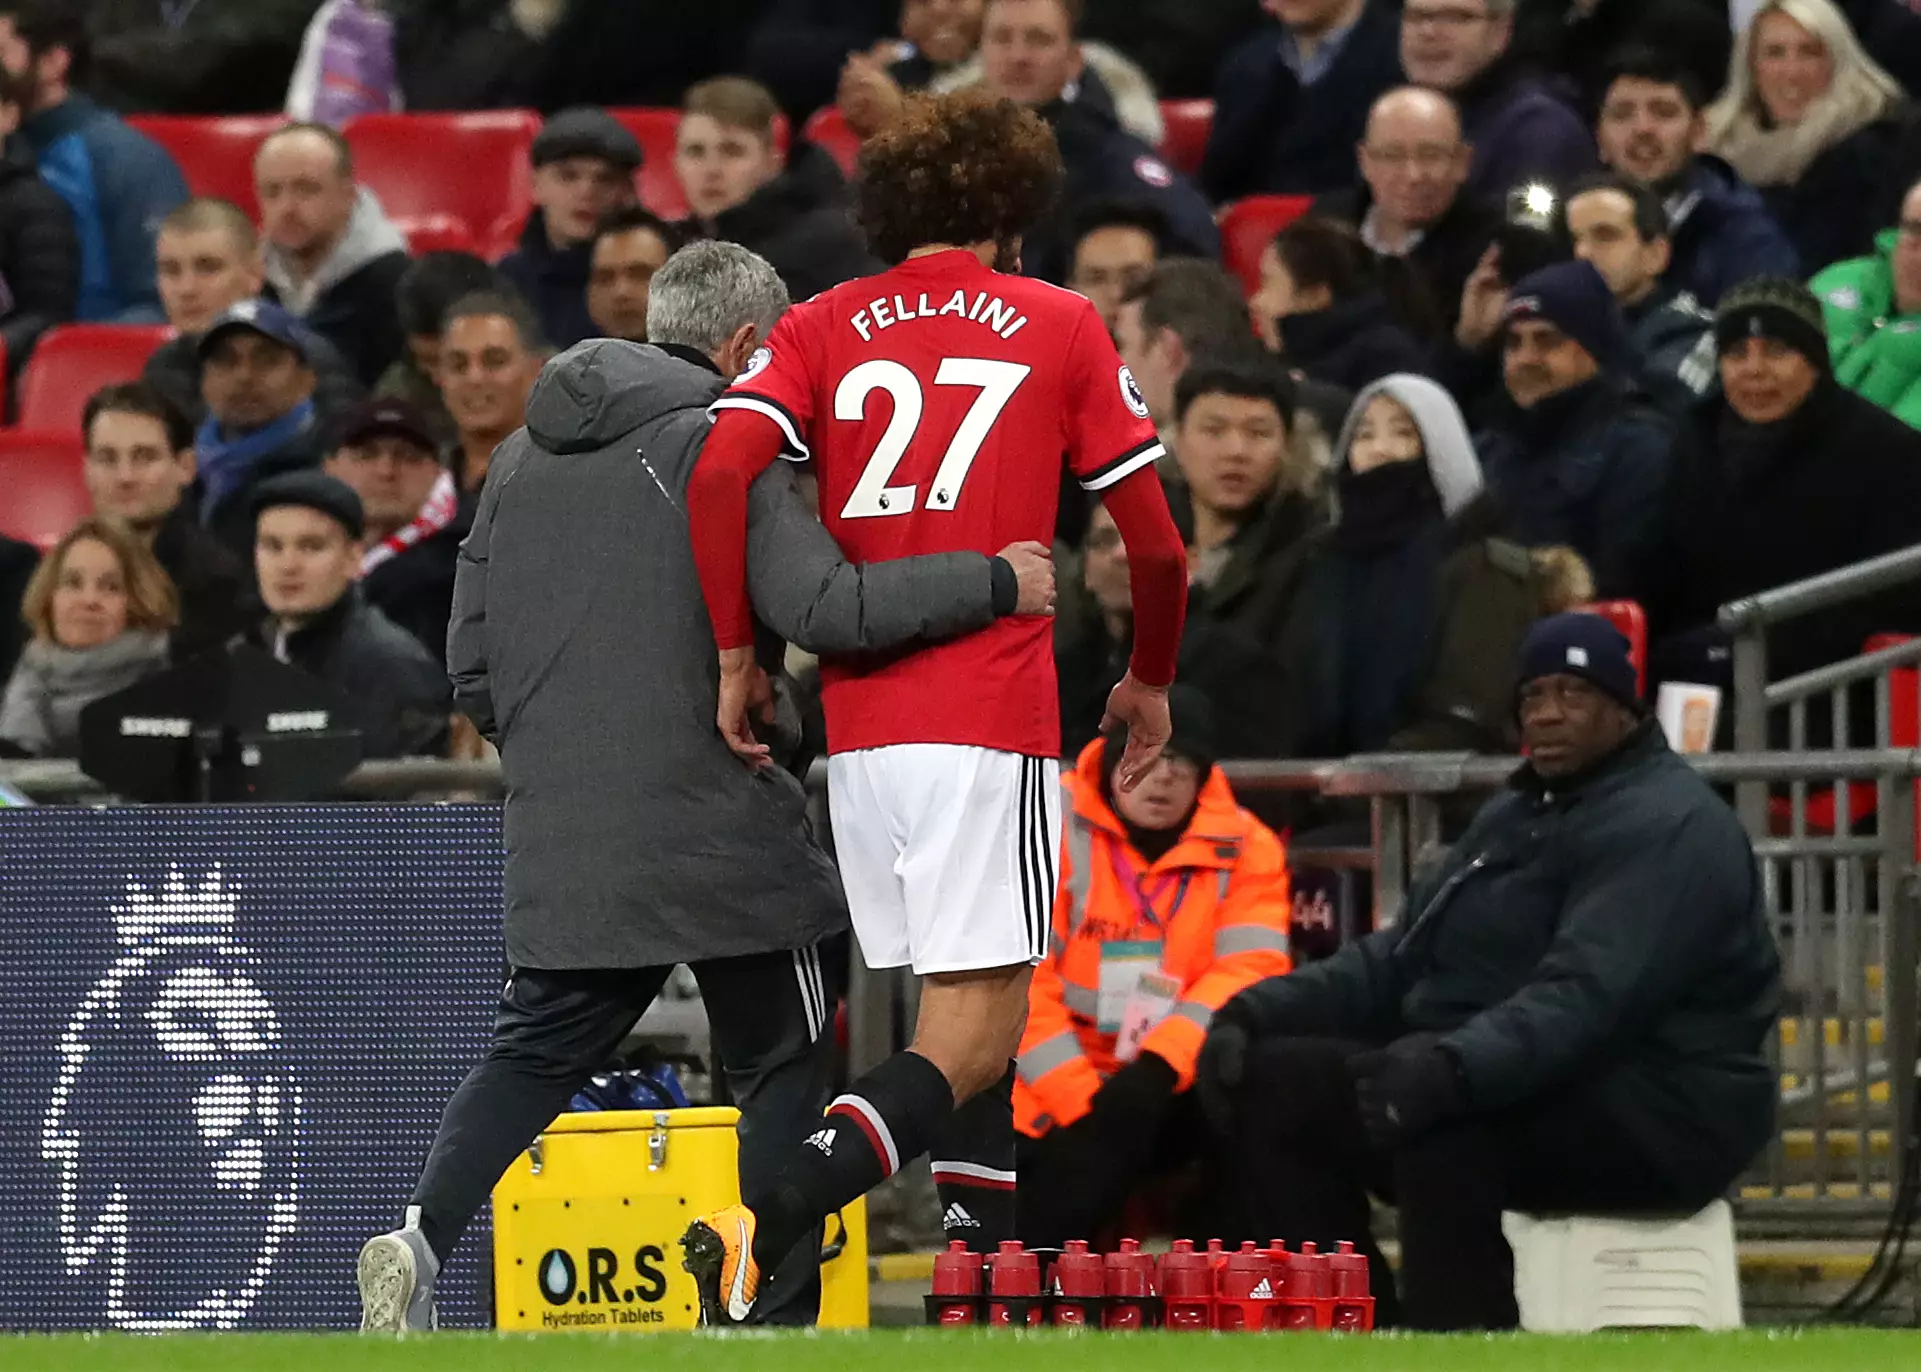 Mourinho consoles Fellaini after substituting him. Image: PA